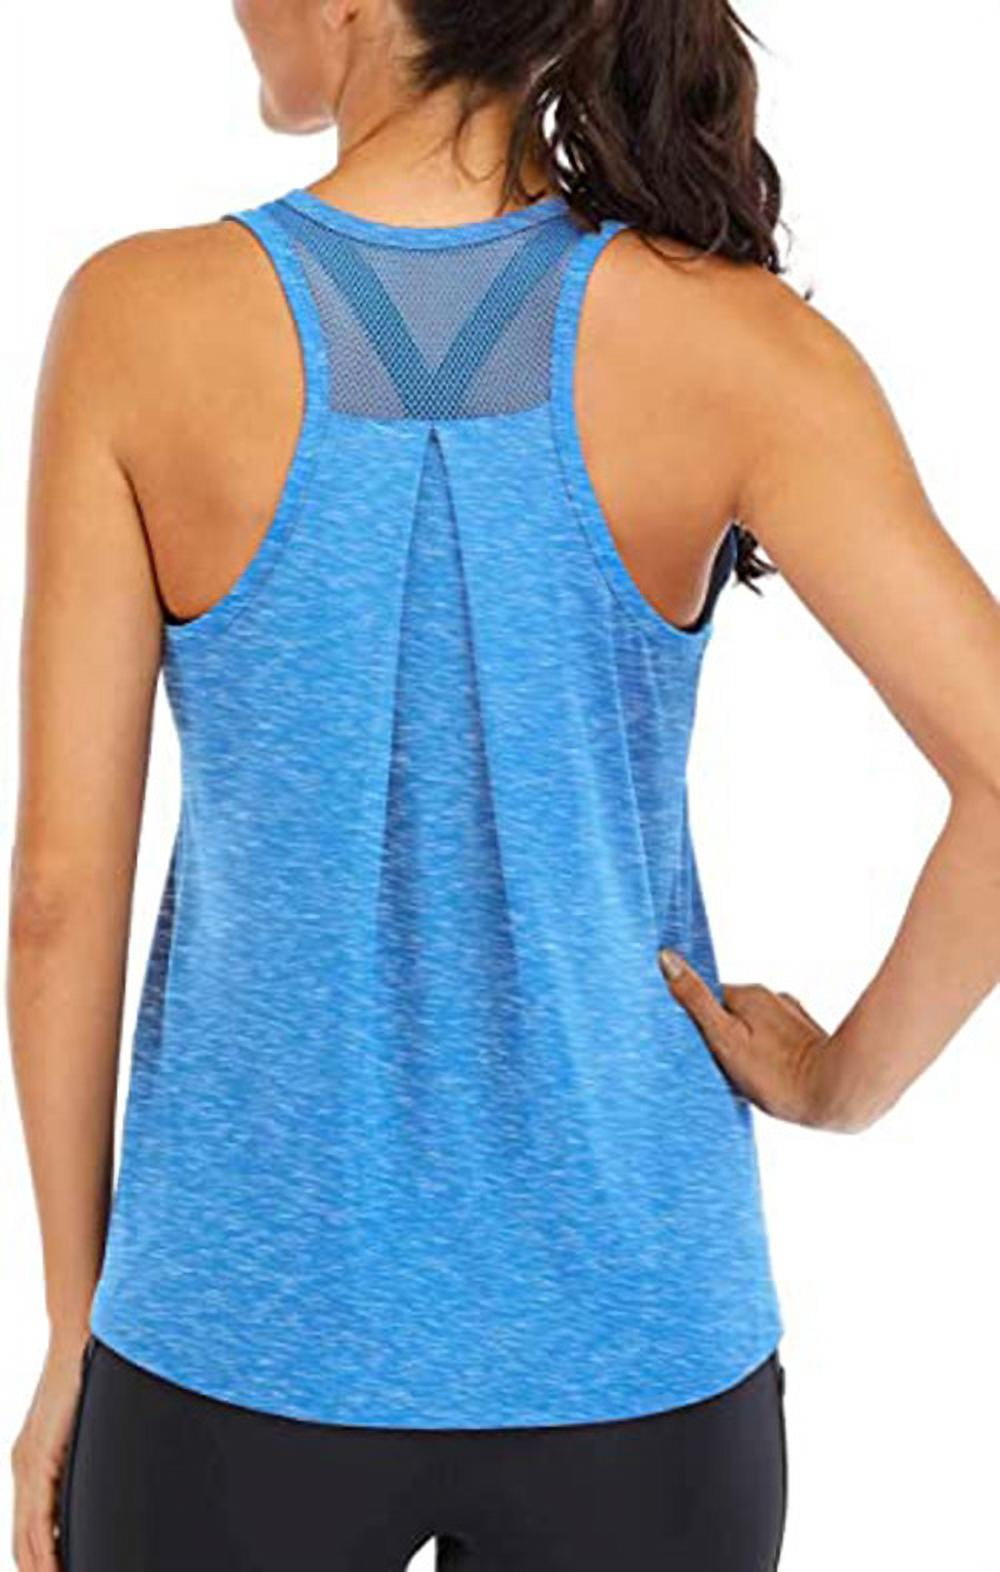 siilsaa Workout Tops for Women Loose Fit Raceback Sleeveless Workout Tank Tops Backless Muscle Athletic Tank Tops Yoga Shirts 